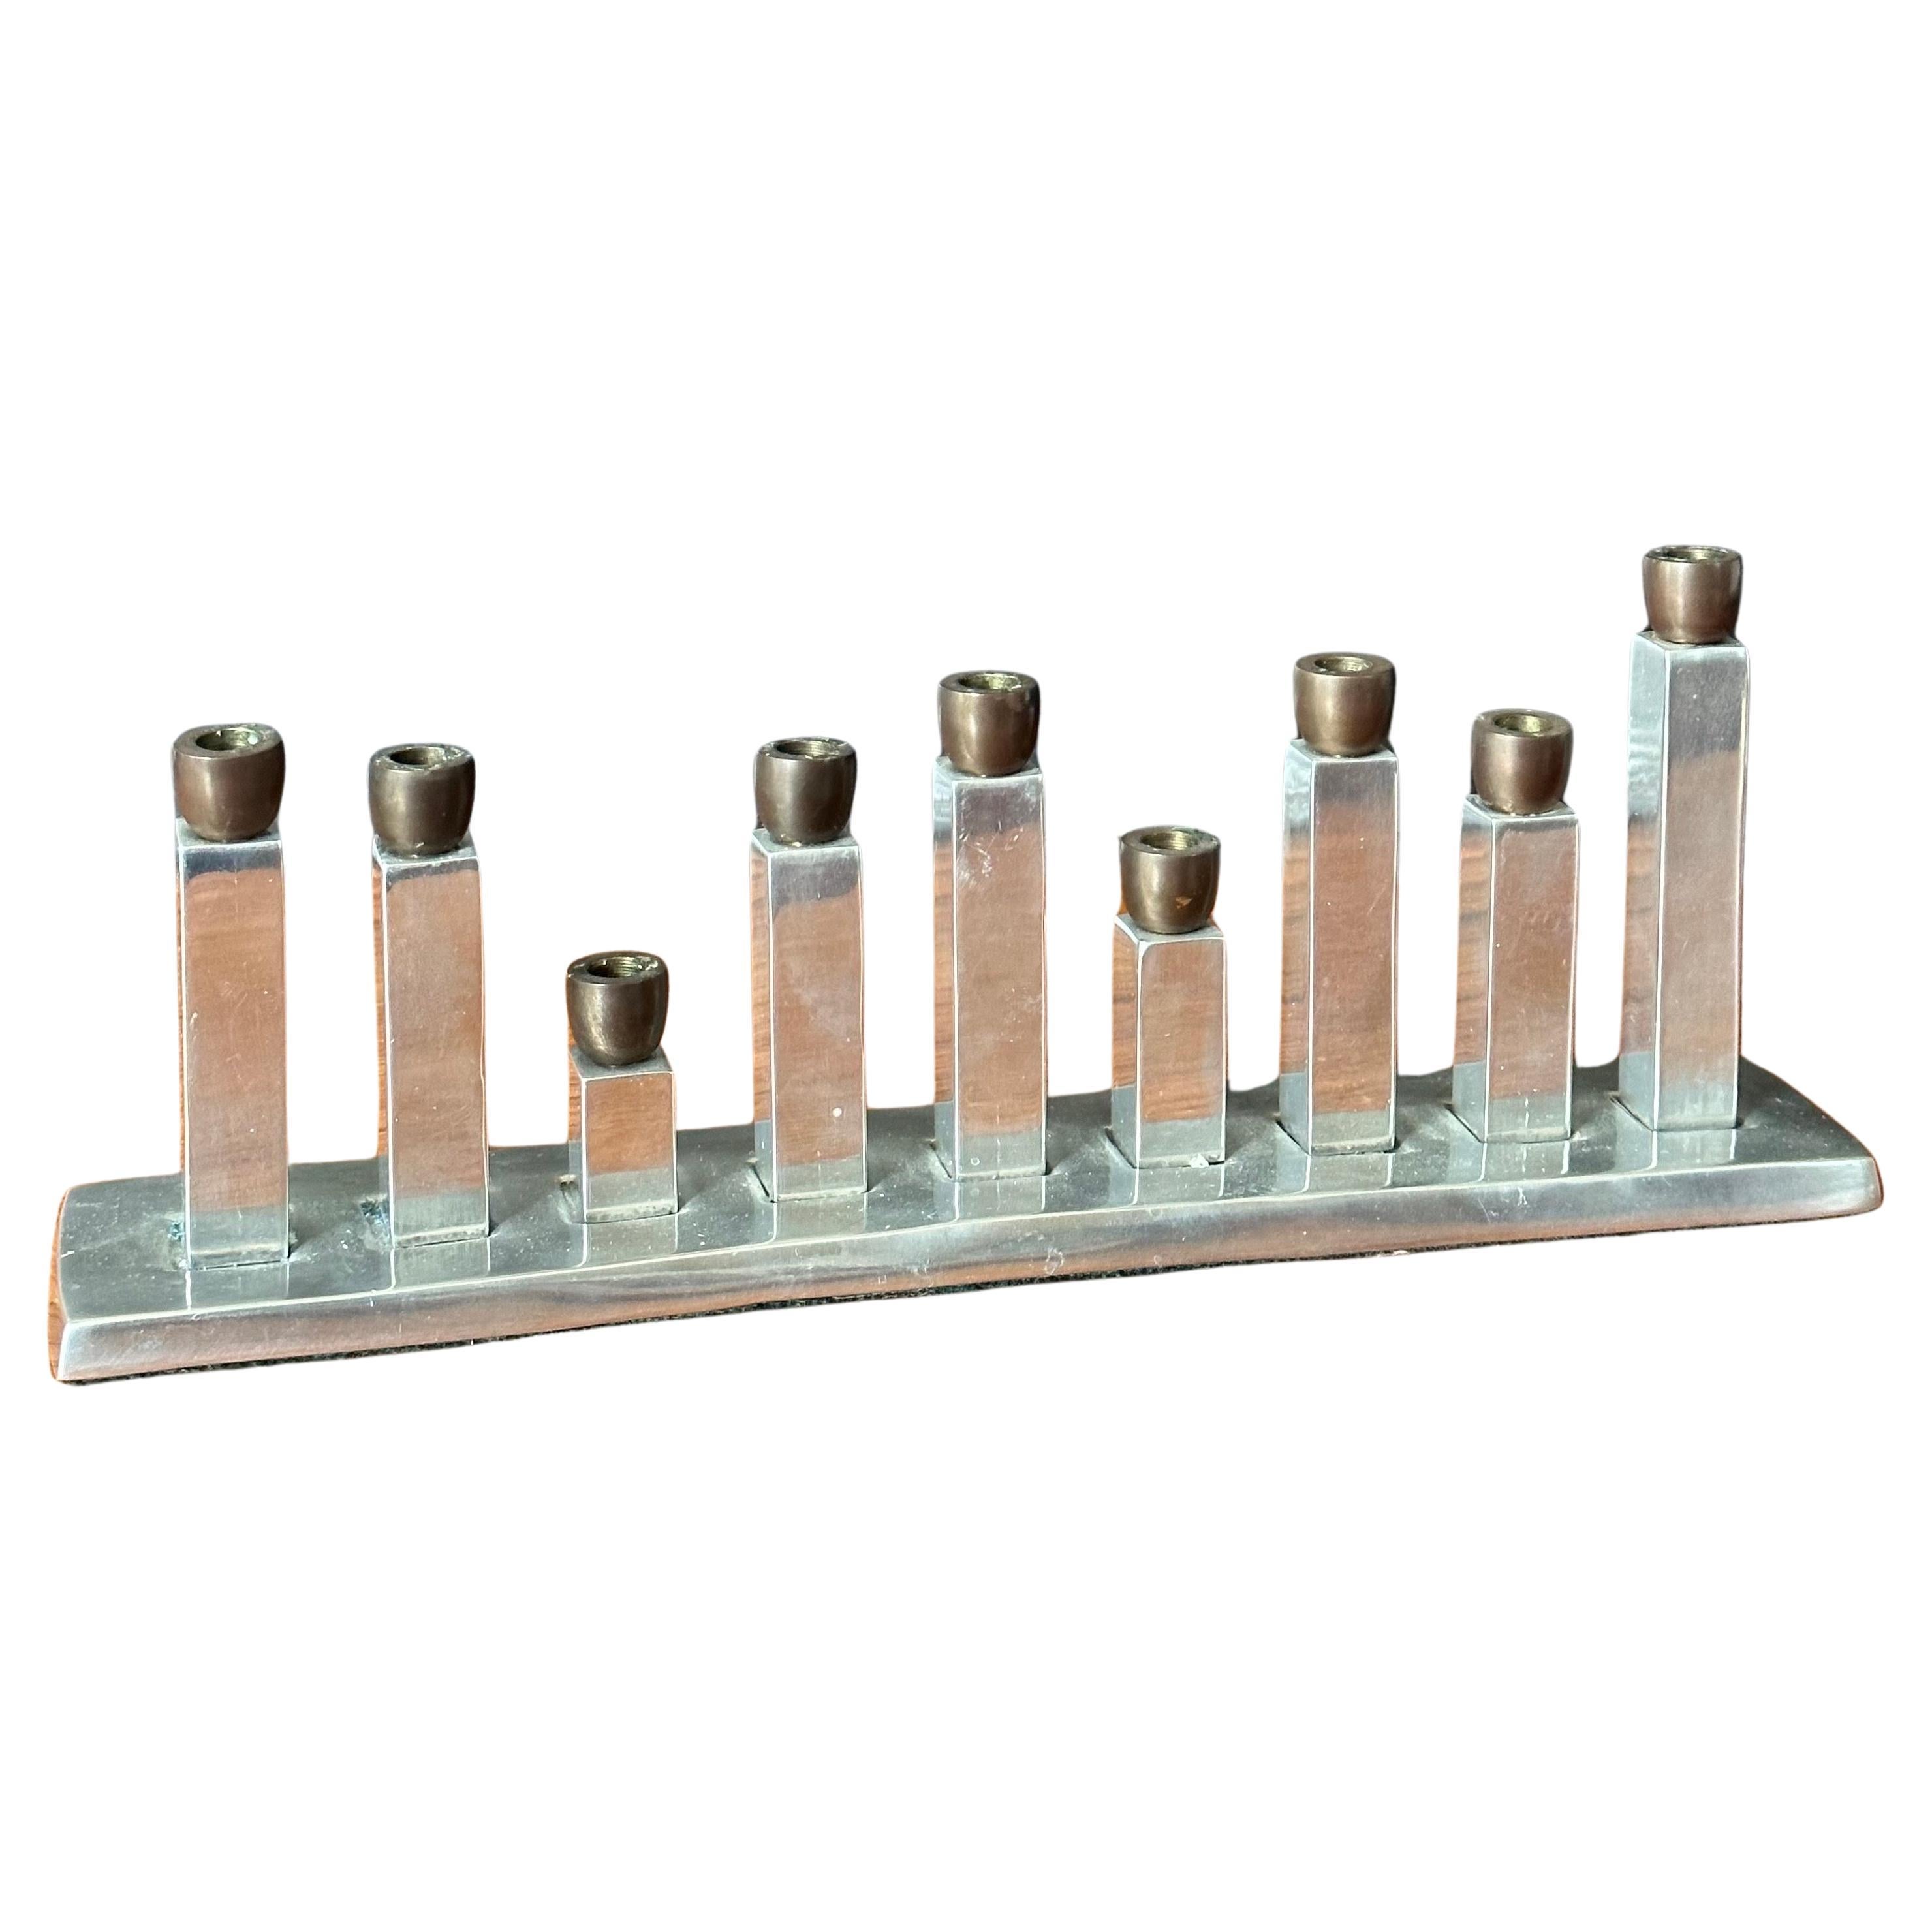 Modernist stainless steel and bronze menorah, circa 1970s. The menorah is in very good vintage condition and measures 11.75